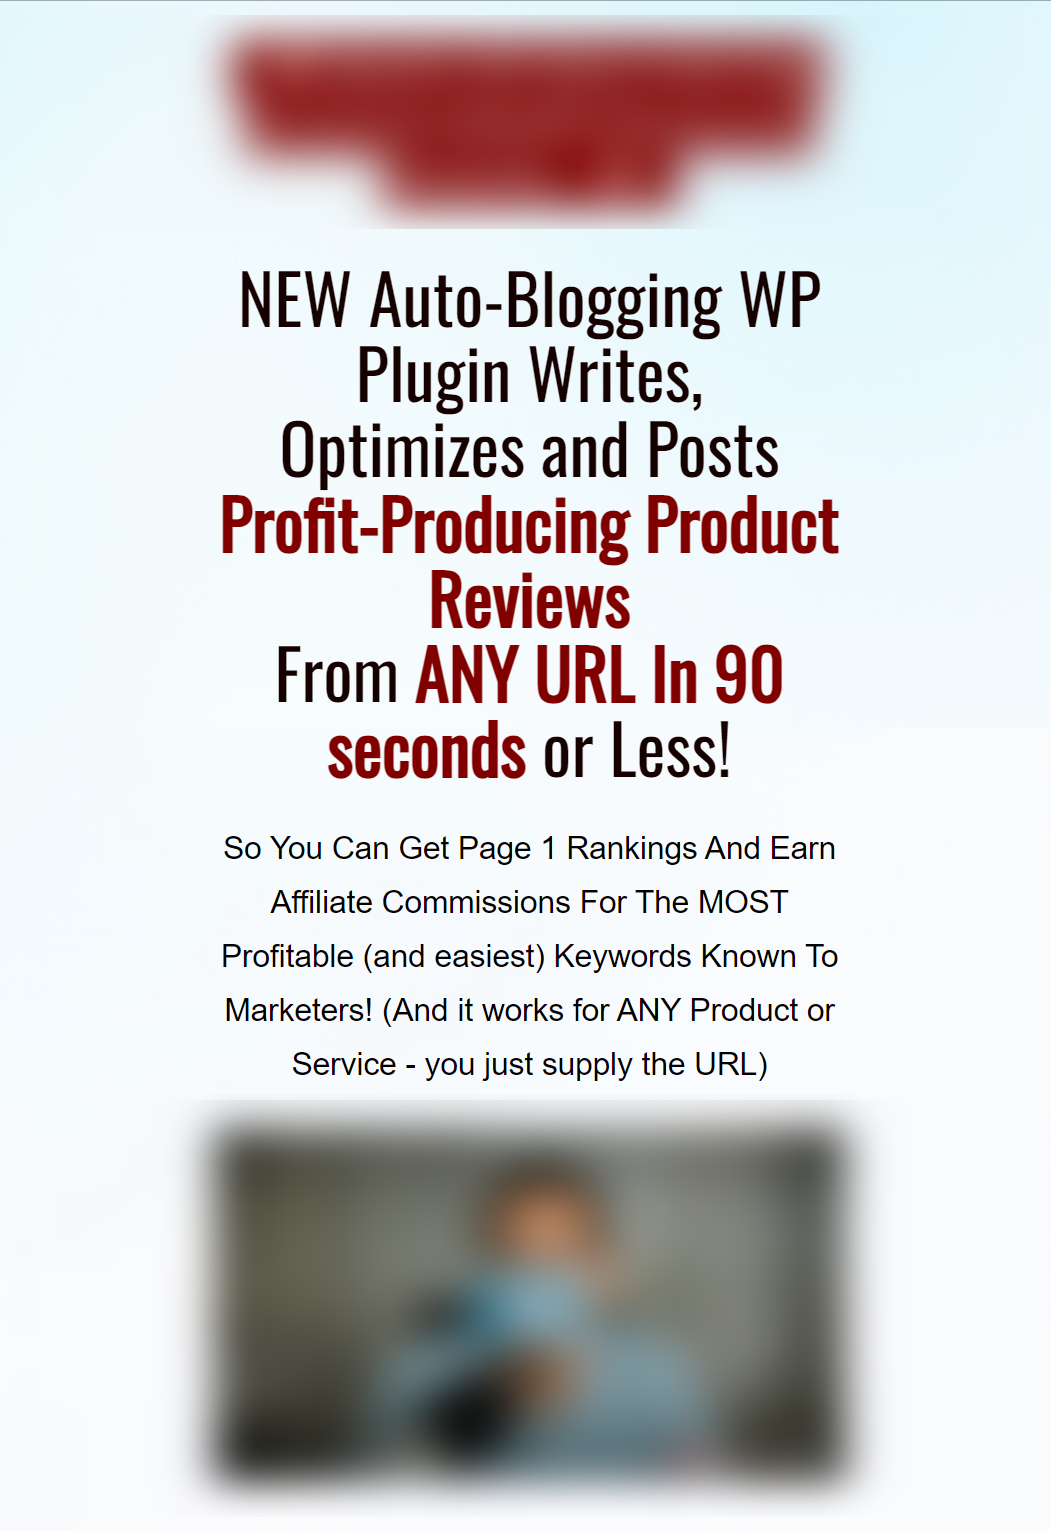 AI Review Engine Pre Launch Launch Special In-Depth AI Review Engine Review: WP's Secret Weapon - Auto-Blogging Plugin for Lightning-Fast Product Reviews